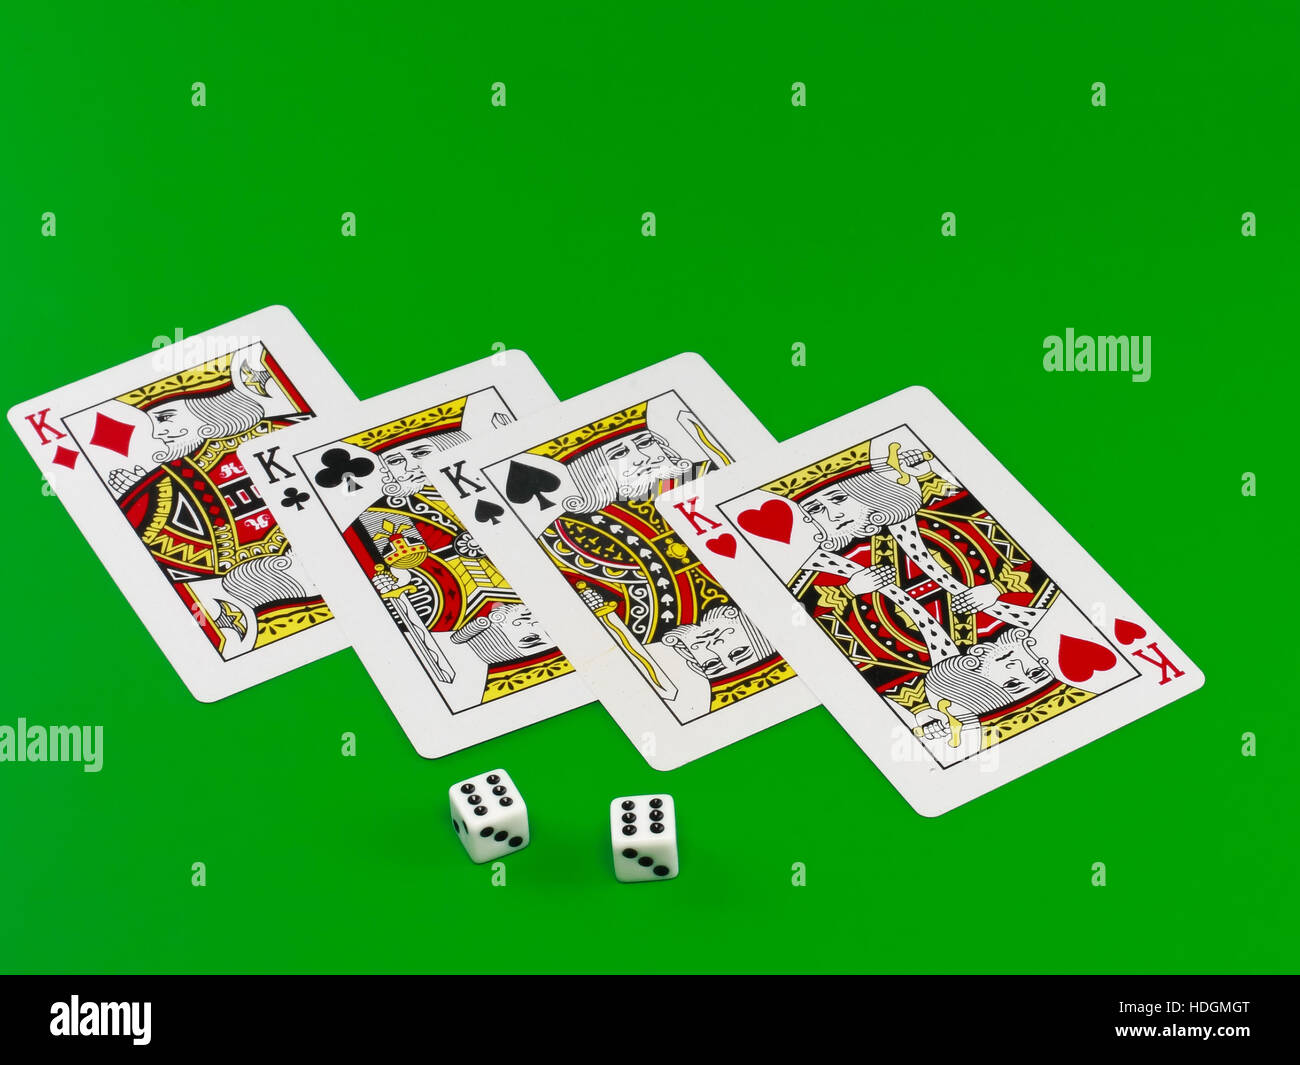 Playing Solitaire Game On Green Background Stock Vector (Royalty